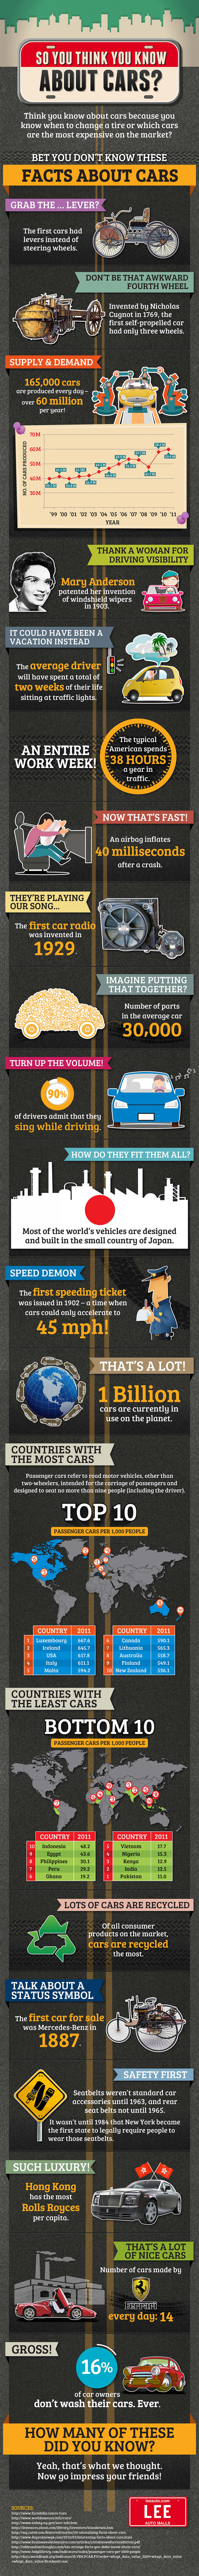 So You Think You Know About Cars? Infographic